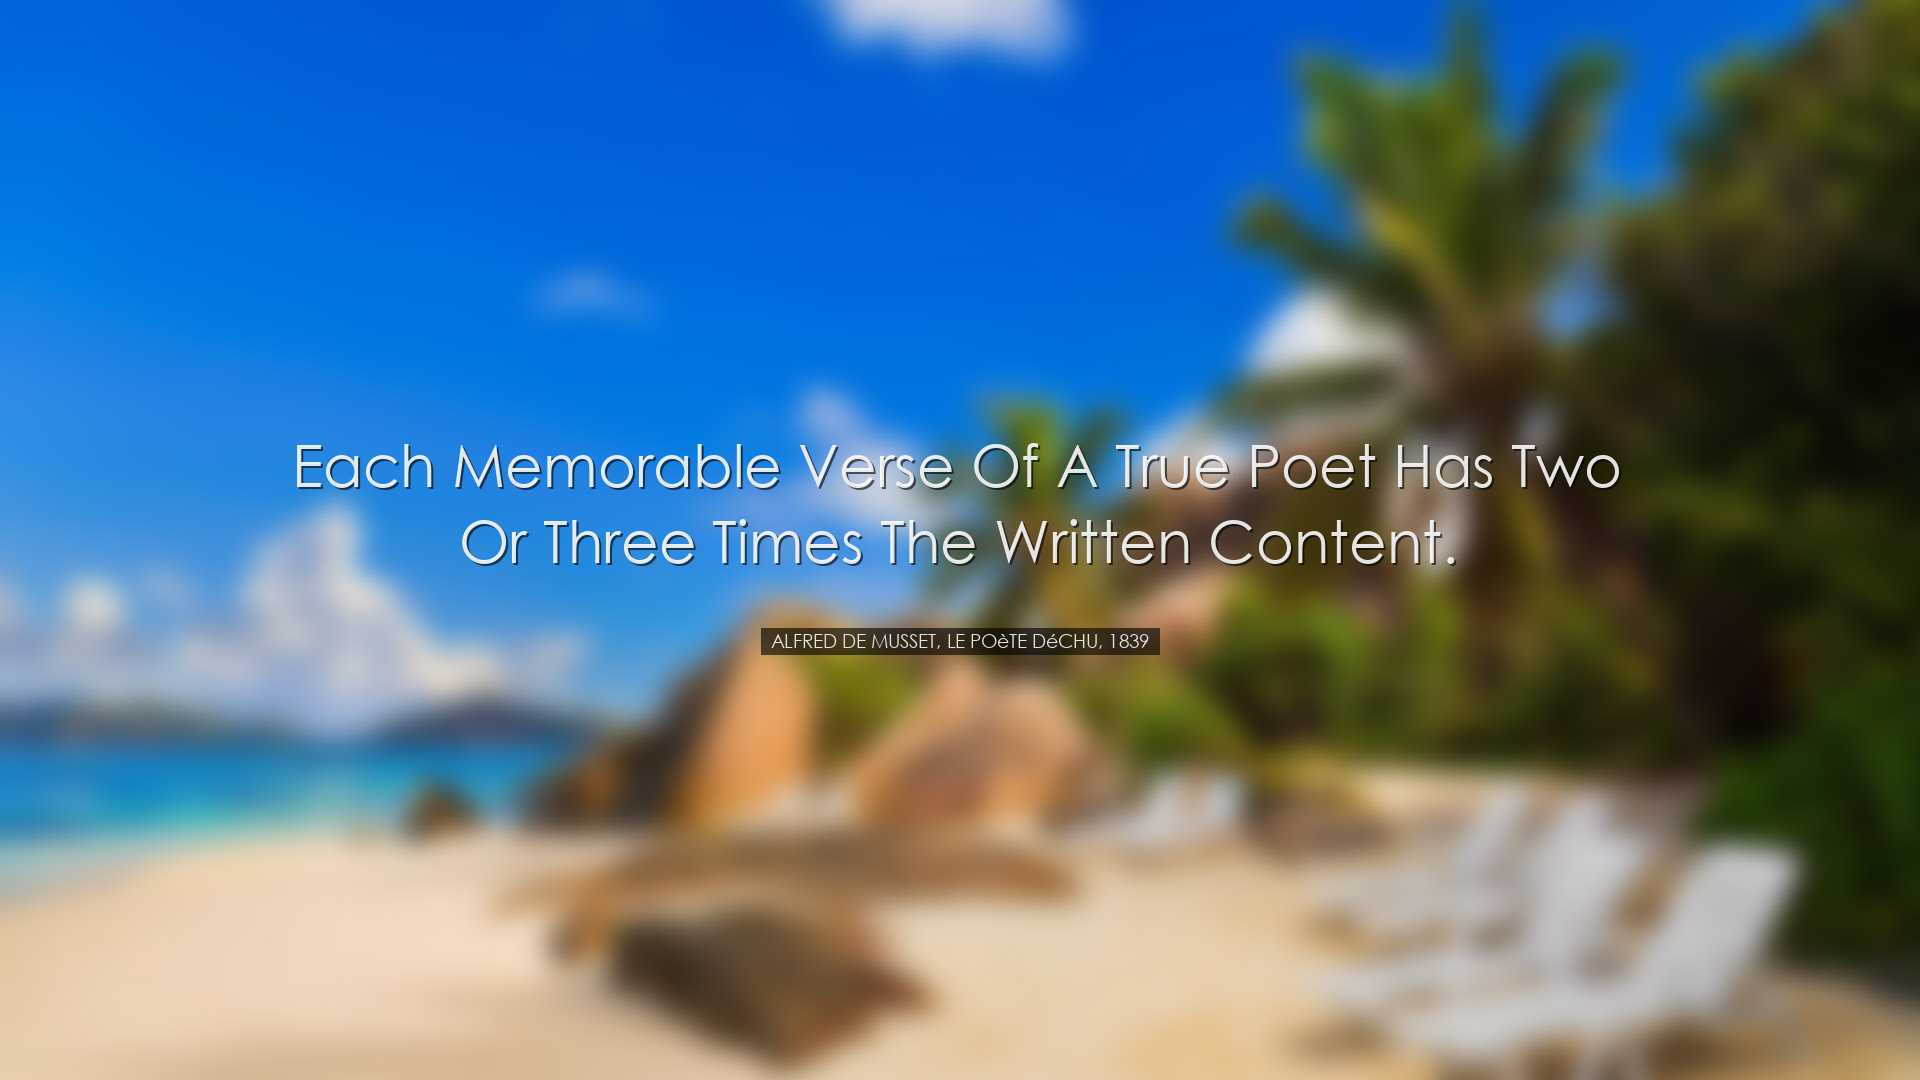 Each memorable verse of a true poet has two or three times the wri